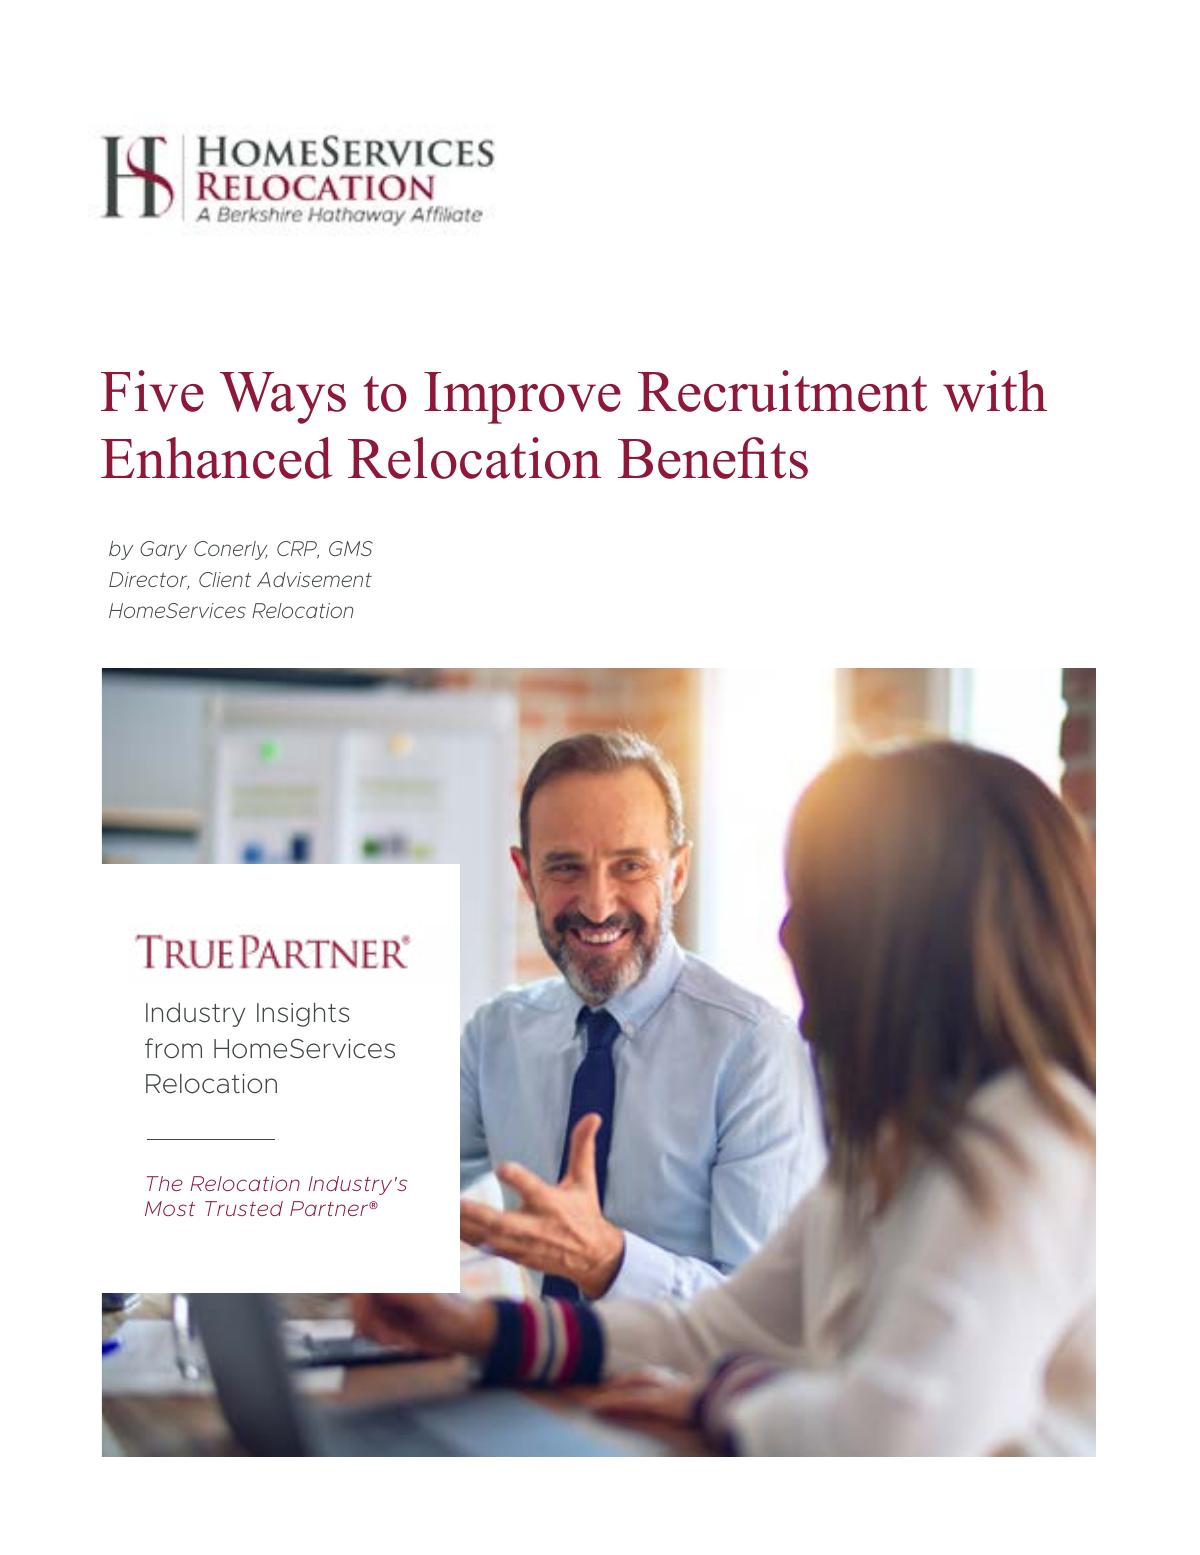 Five Ways to Improve Recruitment with Enhanced Relocation Benefits